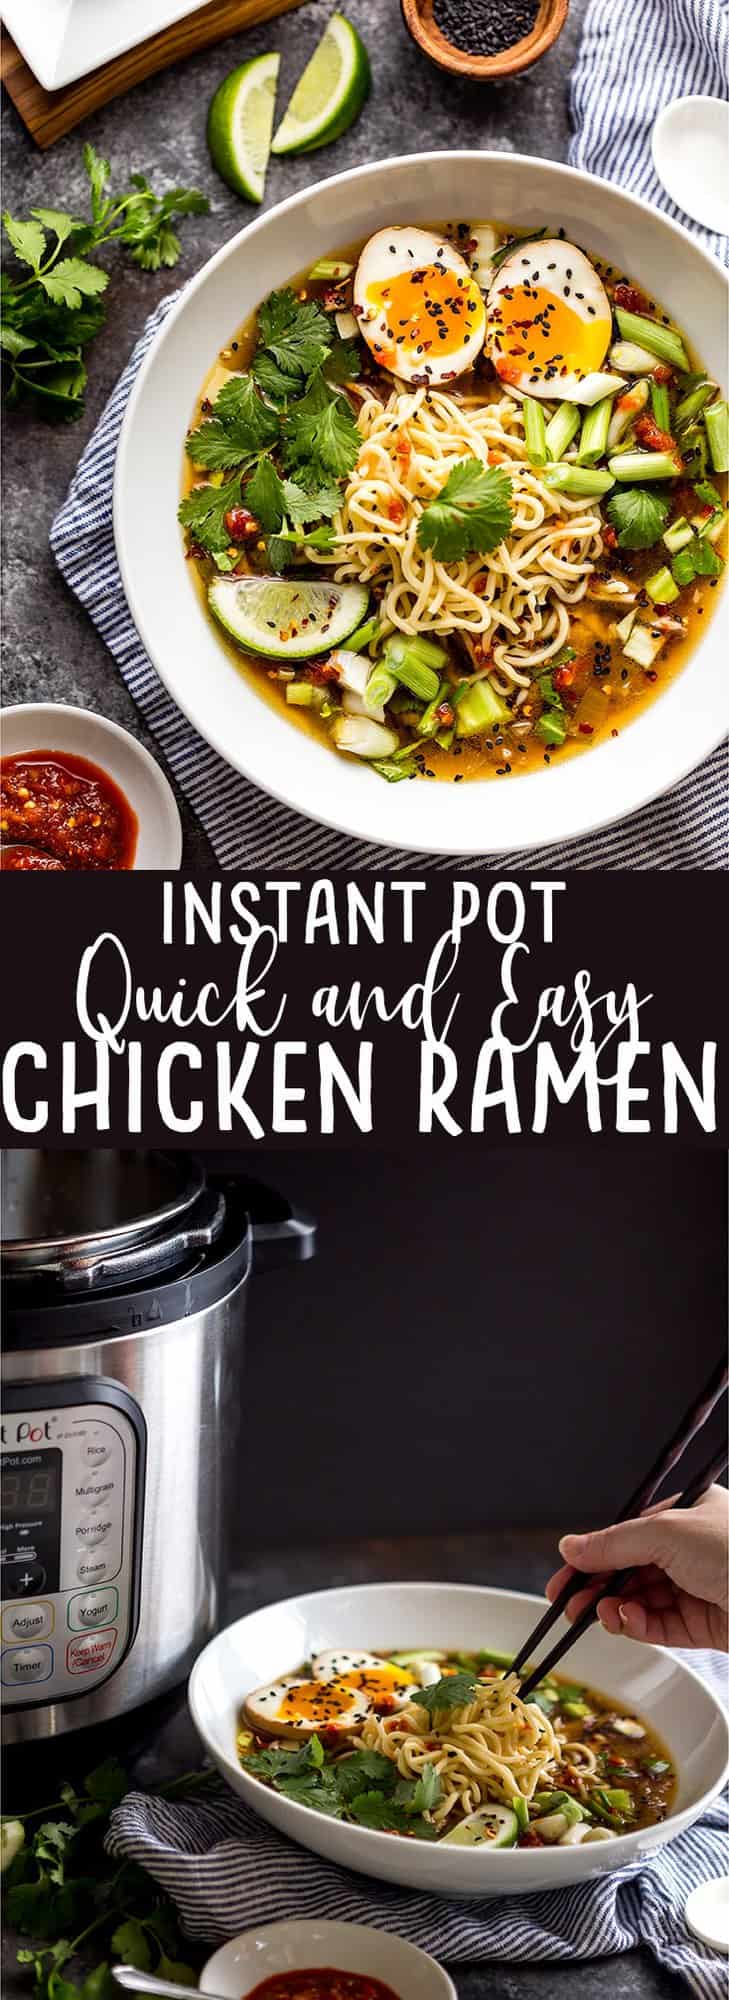 This Instant Pot Chicken Ramen makes a delicious and flavorful ramen in about half an hour in your electric pressure cooker! | Instant Pot Recipe | Instant Pot Soup | Easy Ramen Recipe | Chicken Ramen | Healthy Instant Pot Recipe 